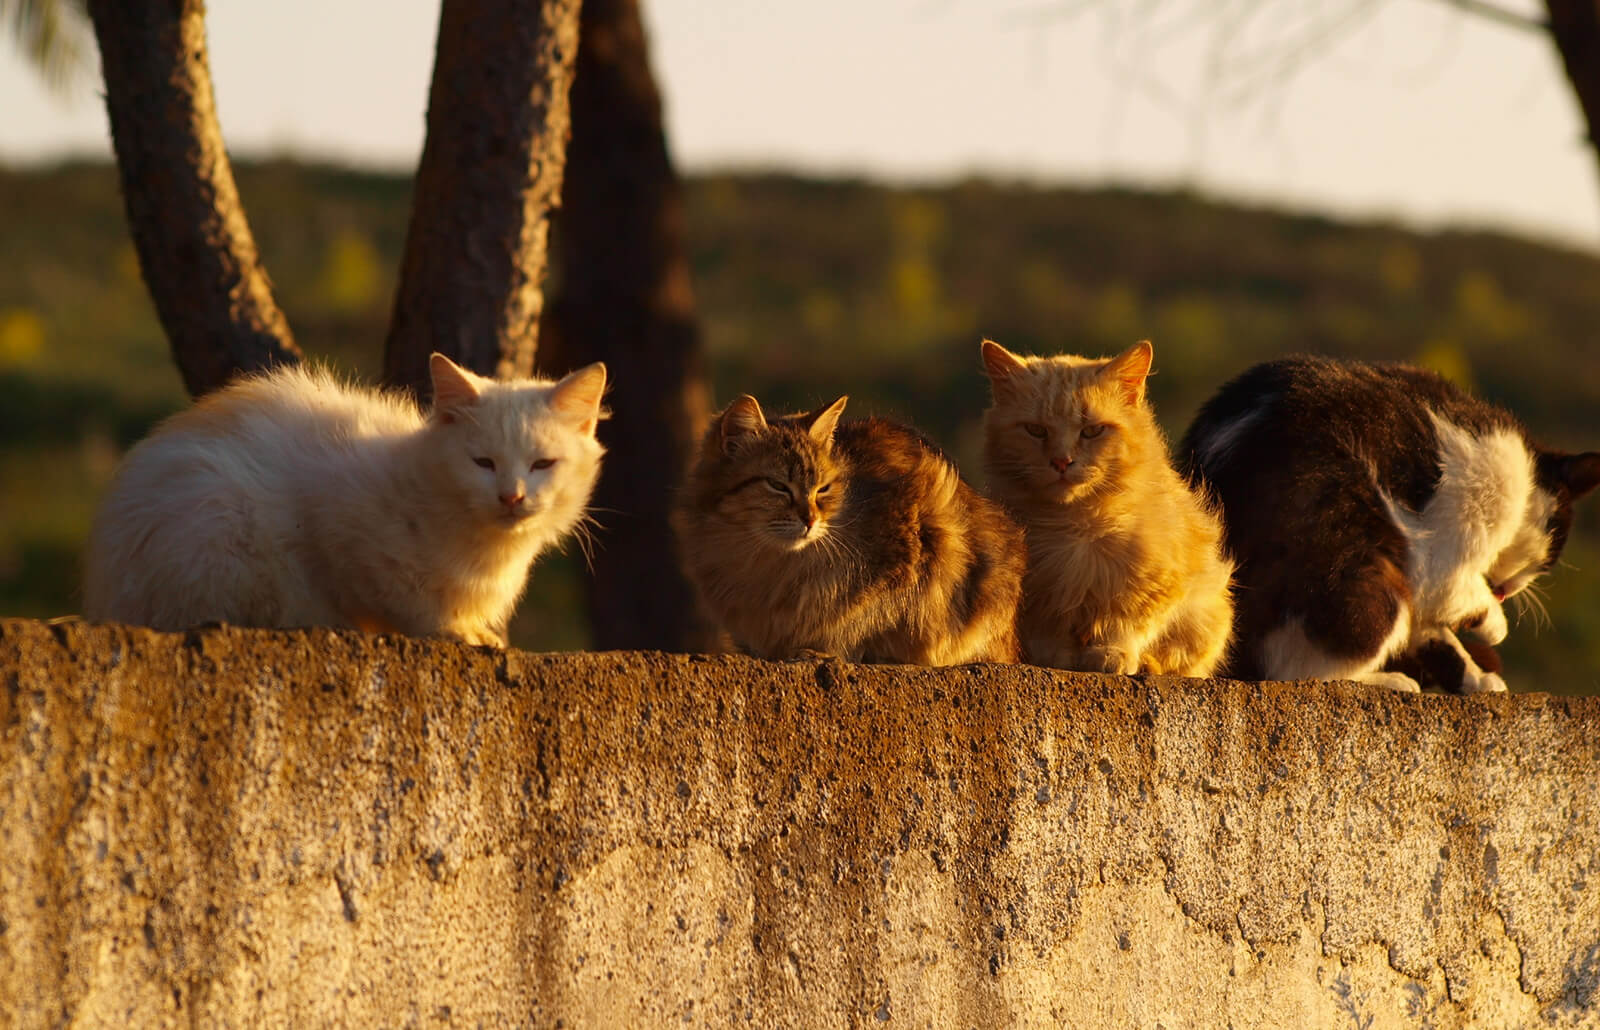 How do you get rid of feral cats?